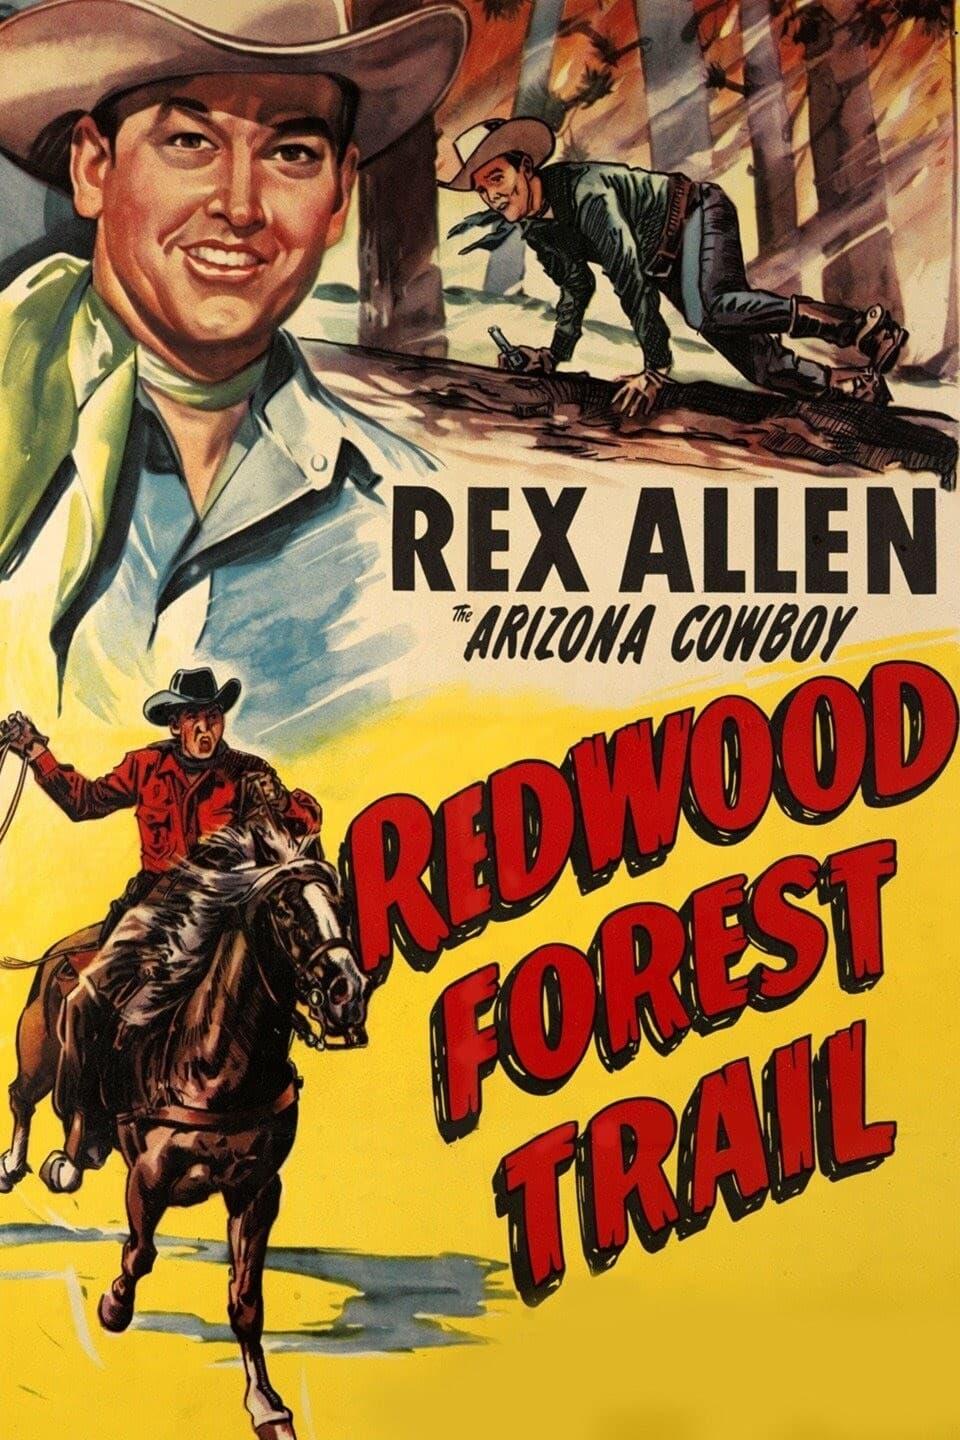 Redwood Forest Trail poster